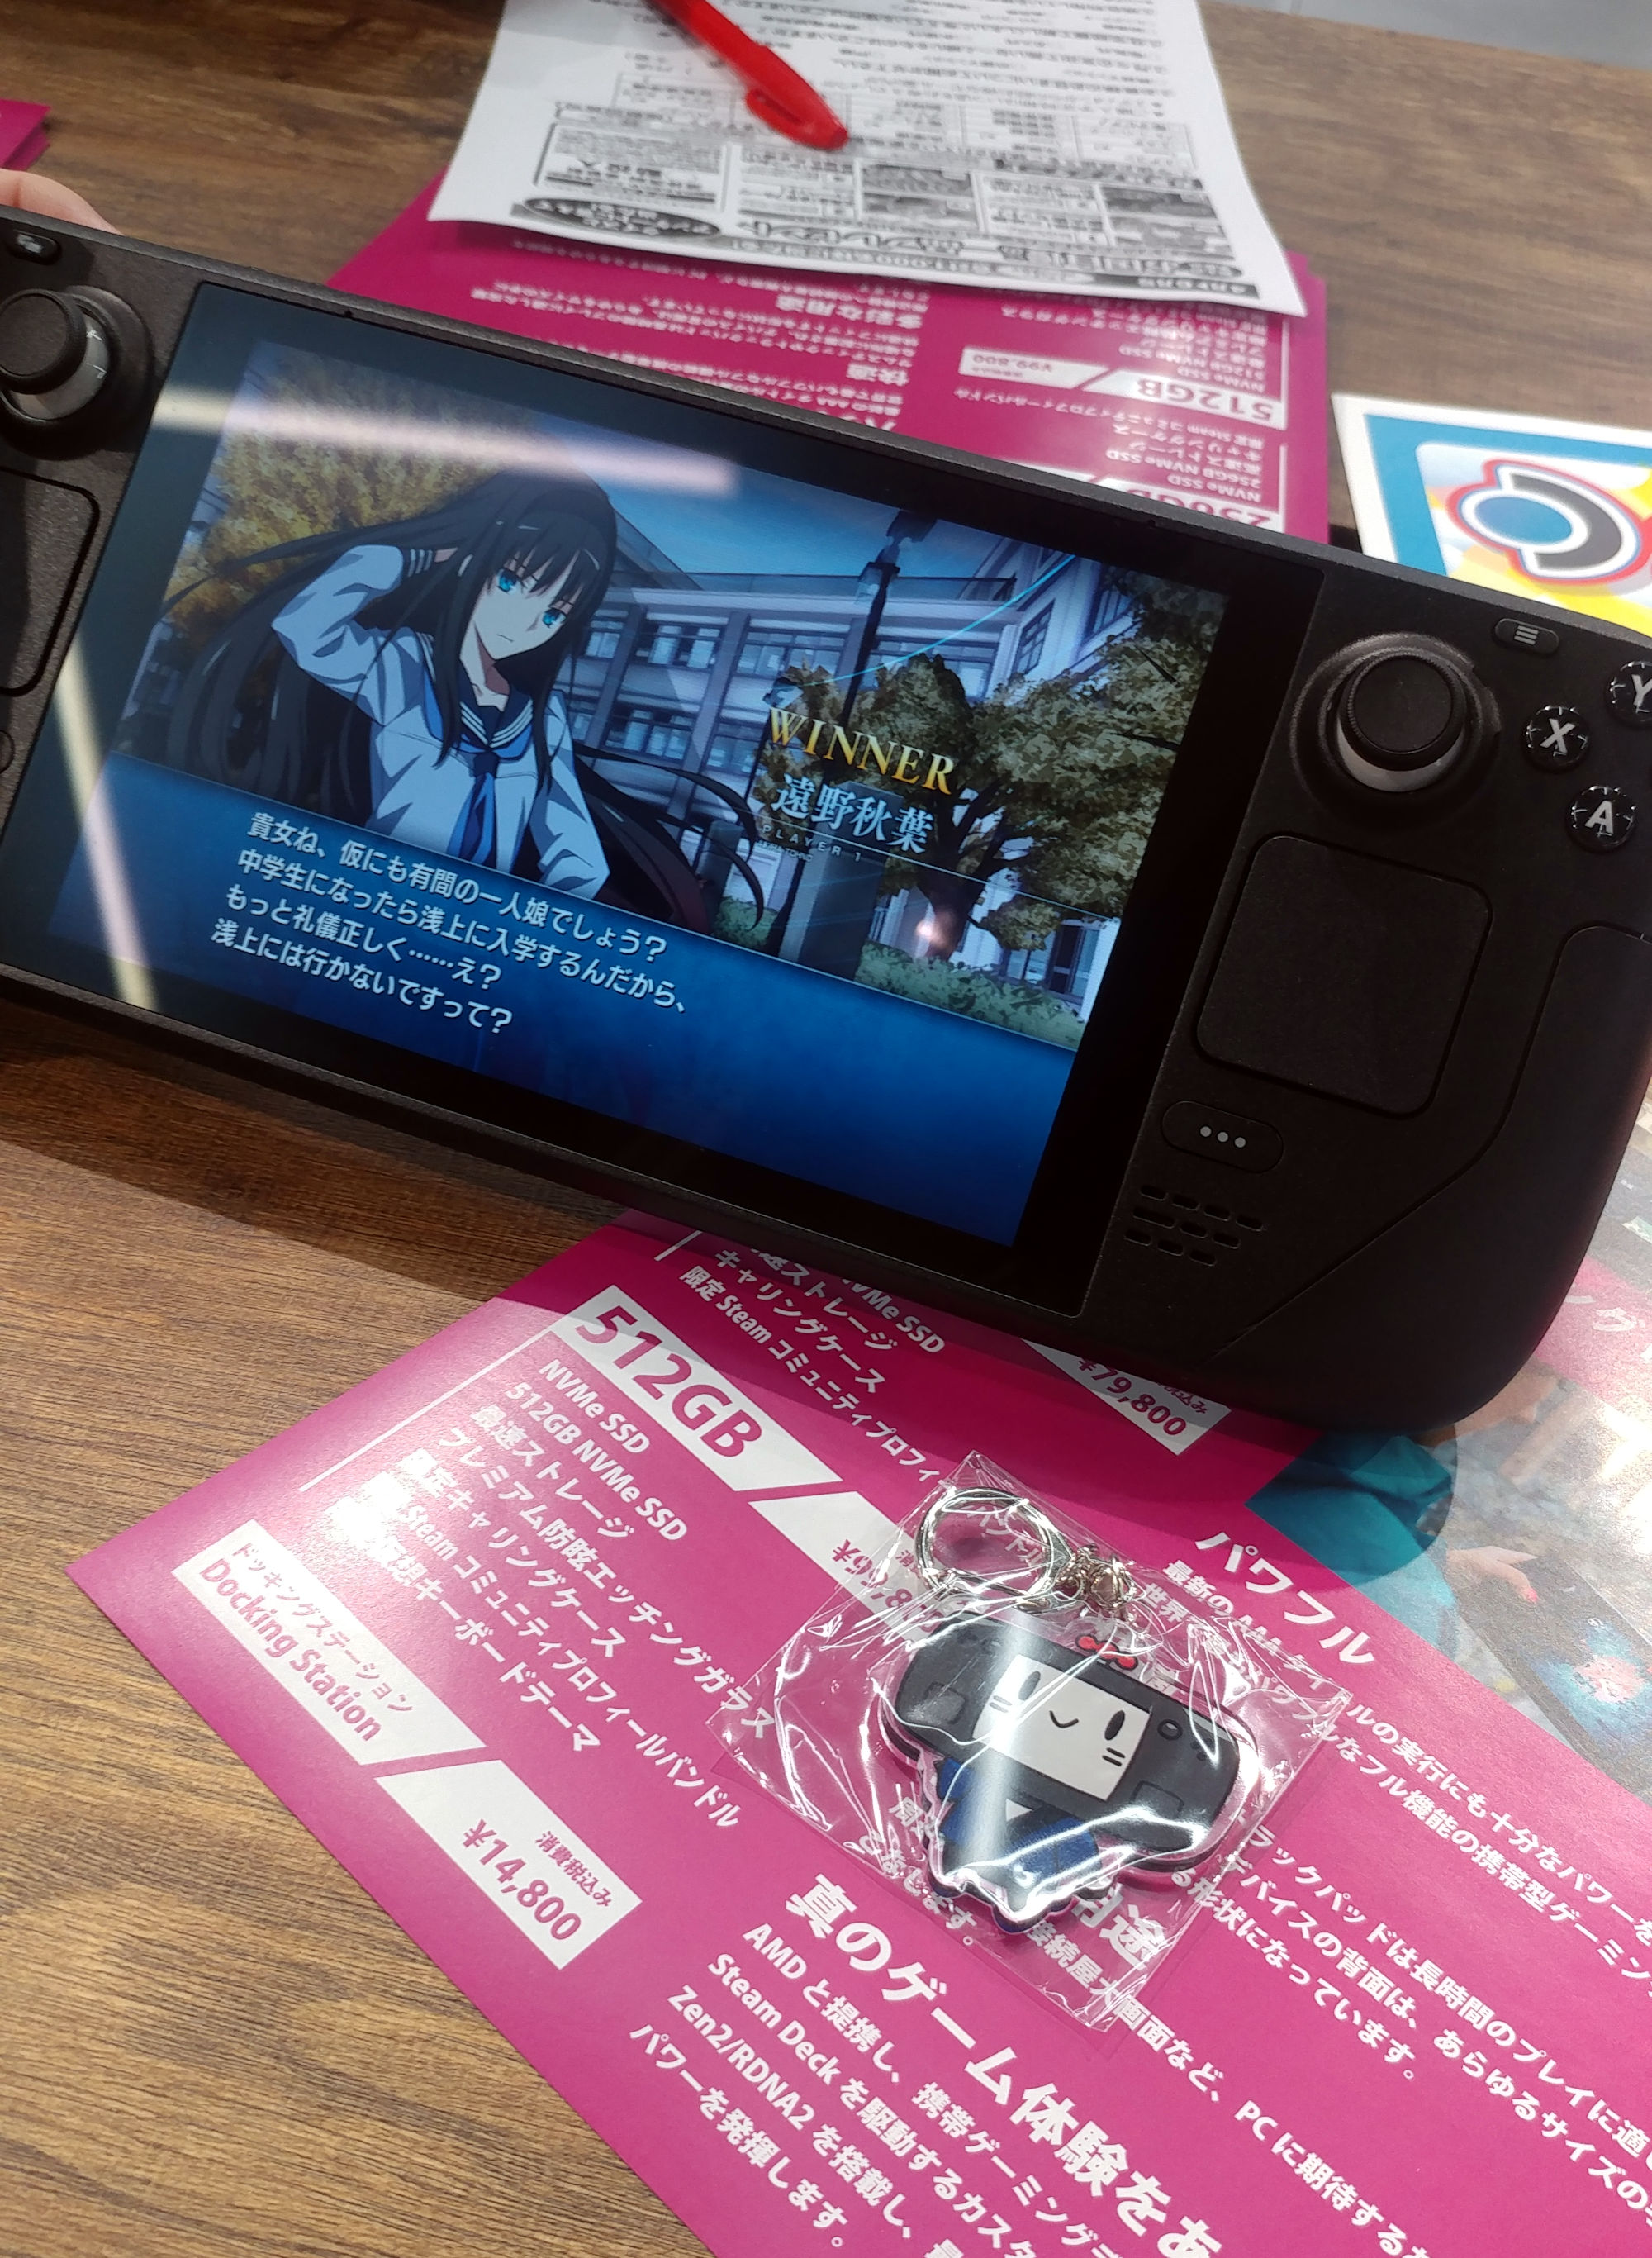 Steam Deck Launches in Stores in Japan - Full Coverage